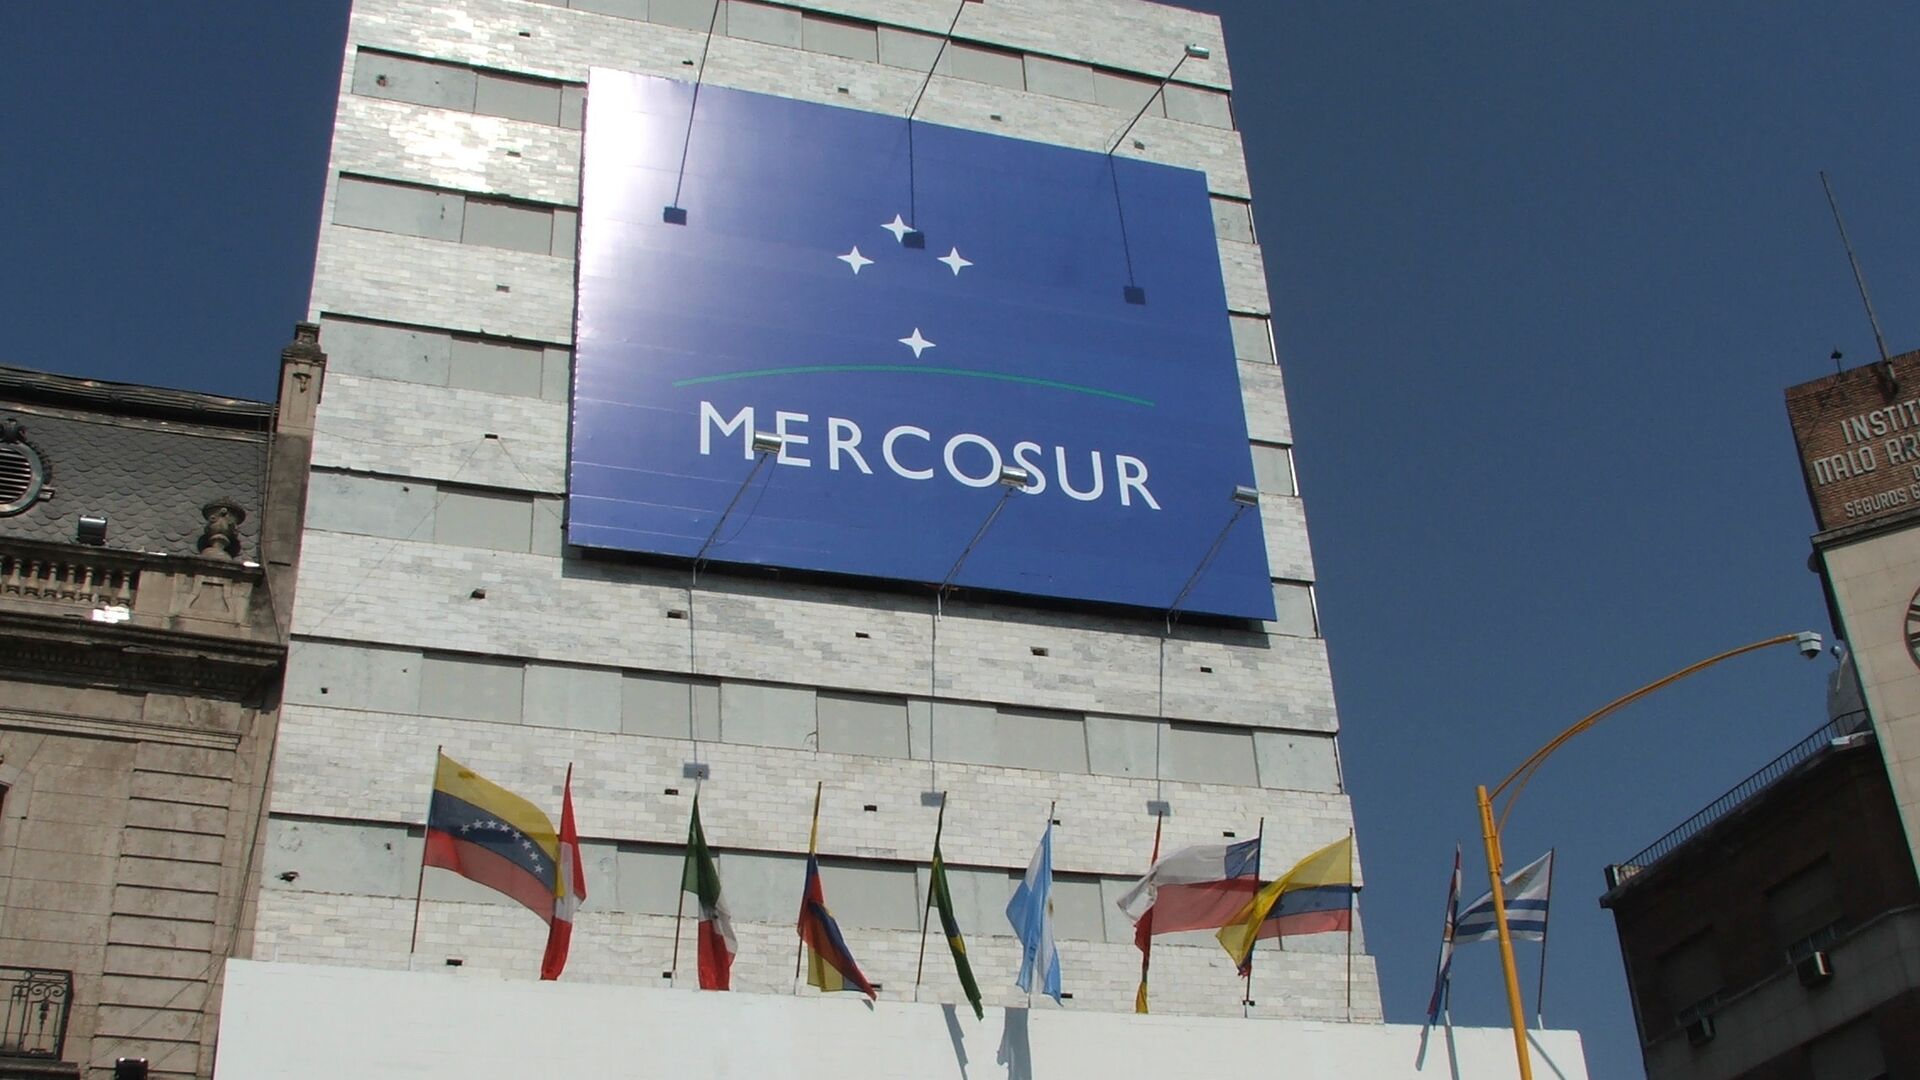  Argentina advocates for healthcare self-sufficiency in Mercosur. (Photo Internet reproduction)